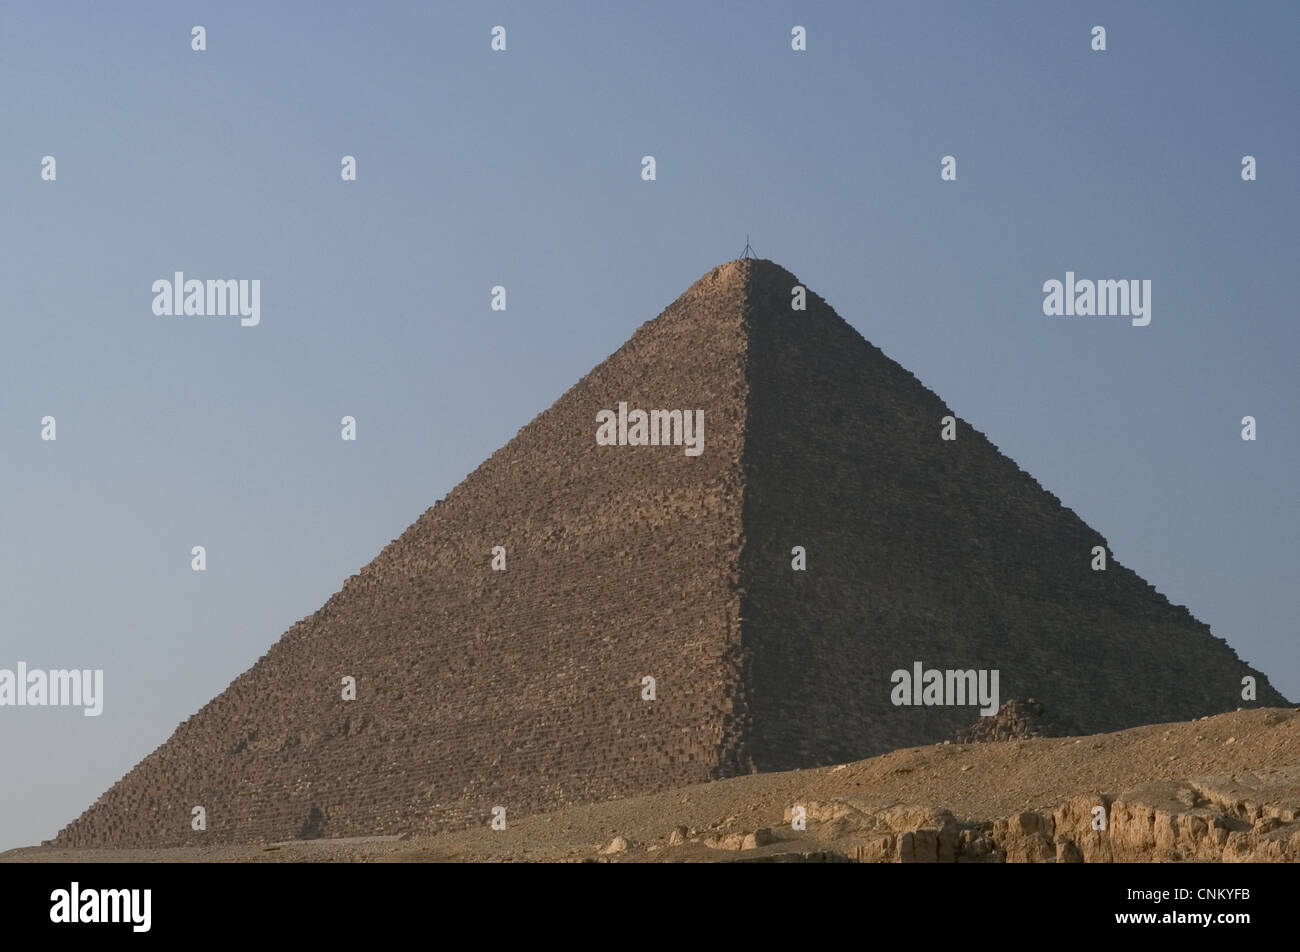 Egypt. The Great Pyramid of Giza, called the Pyramid of Khufu or Cheops ...